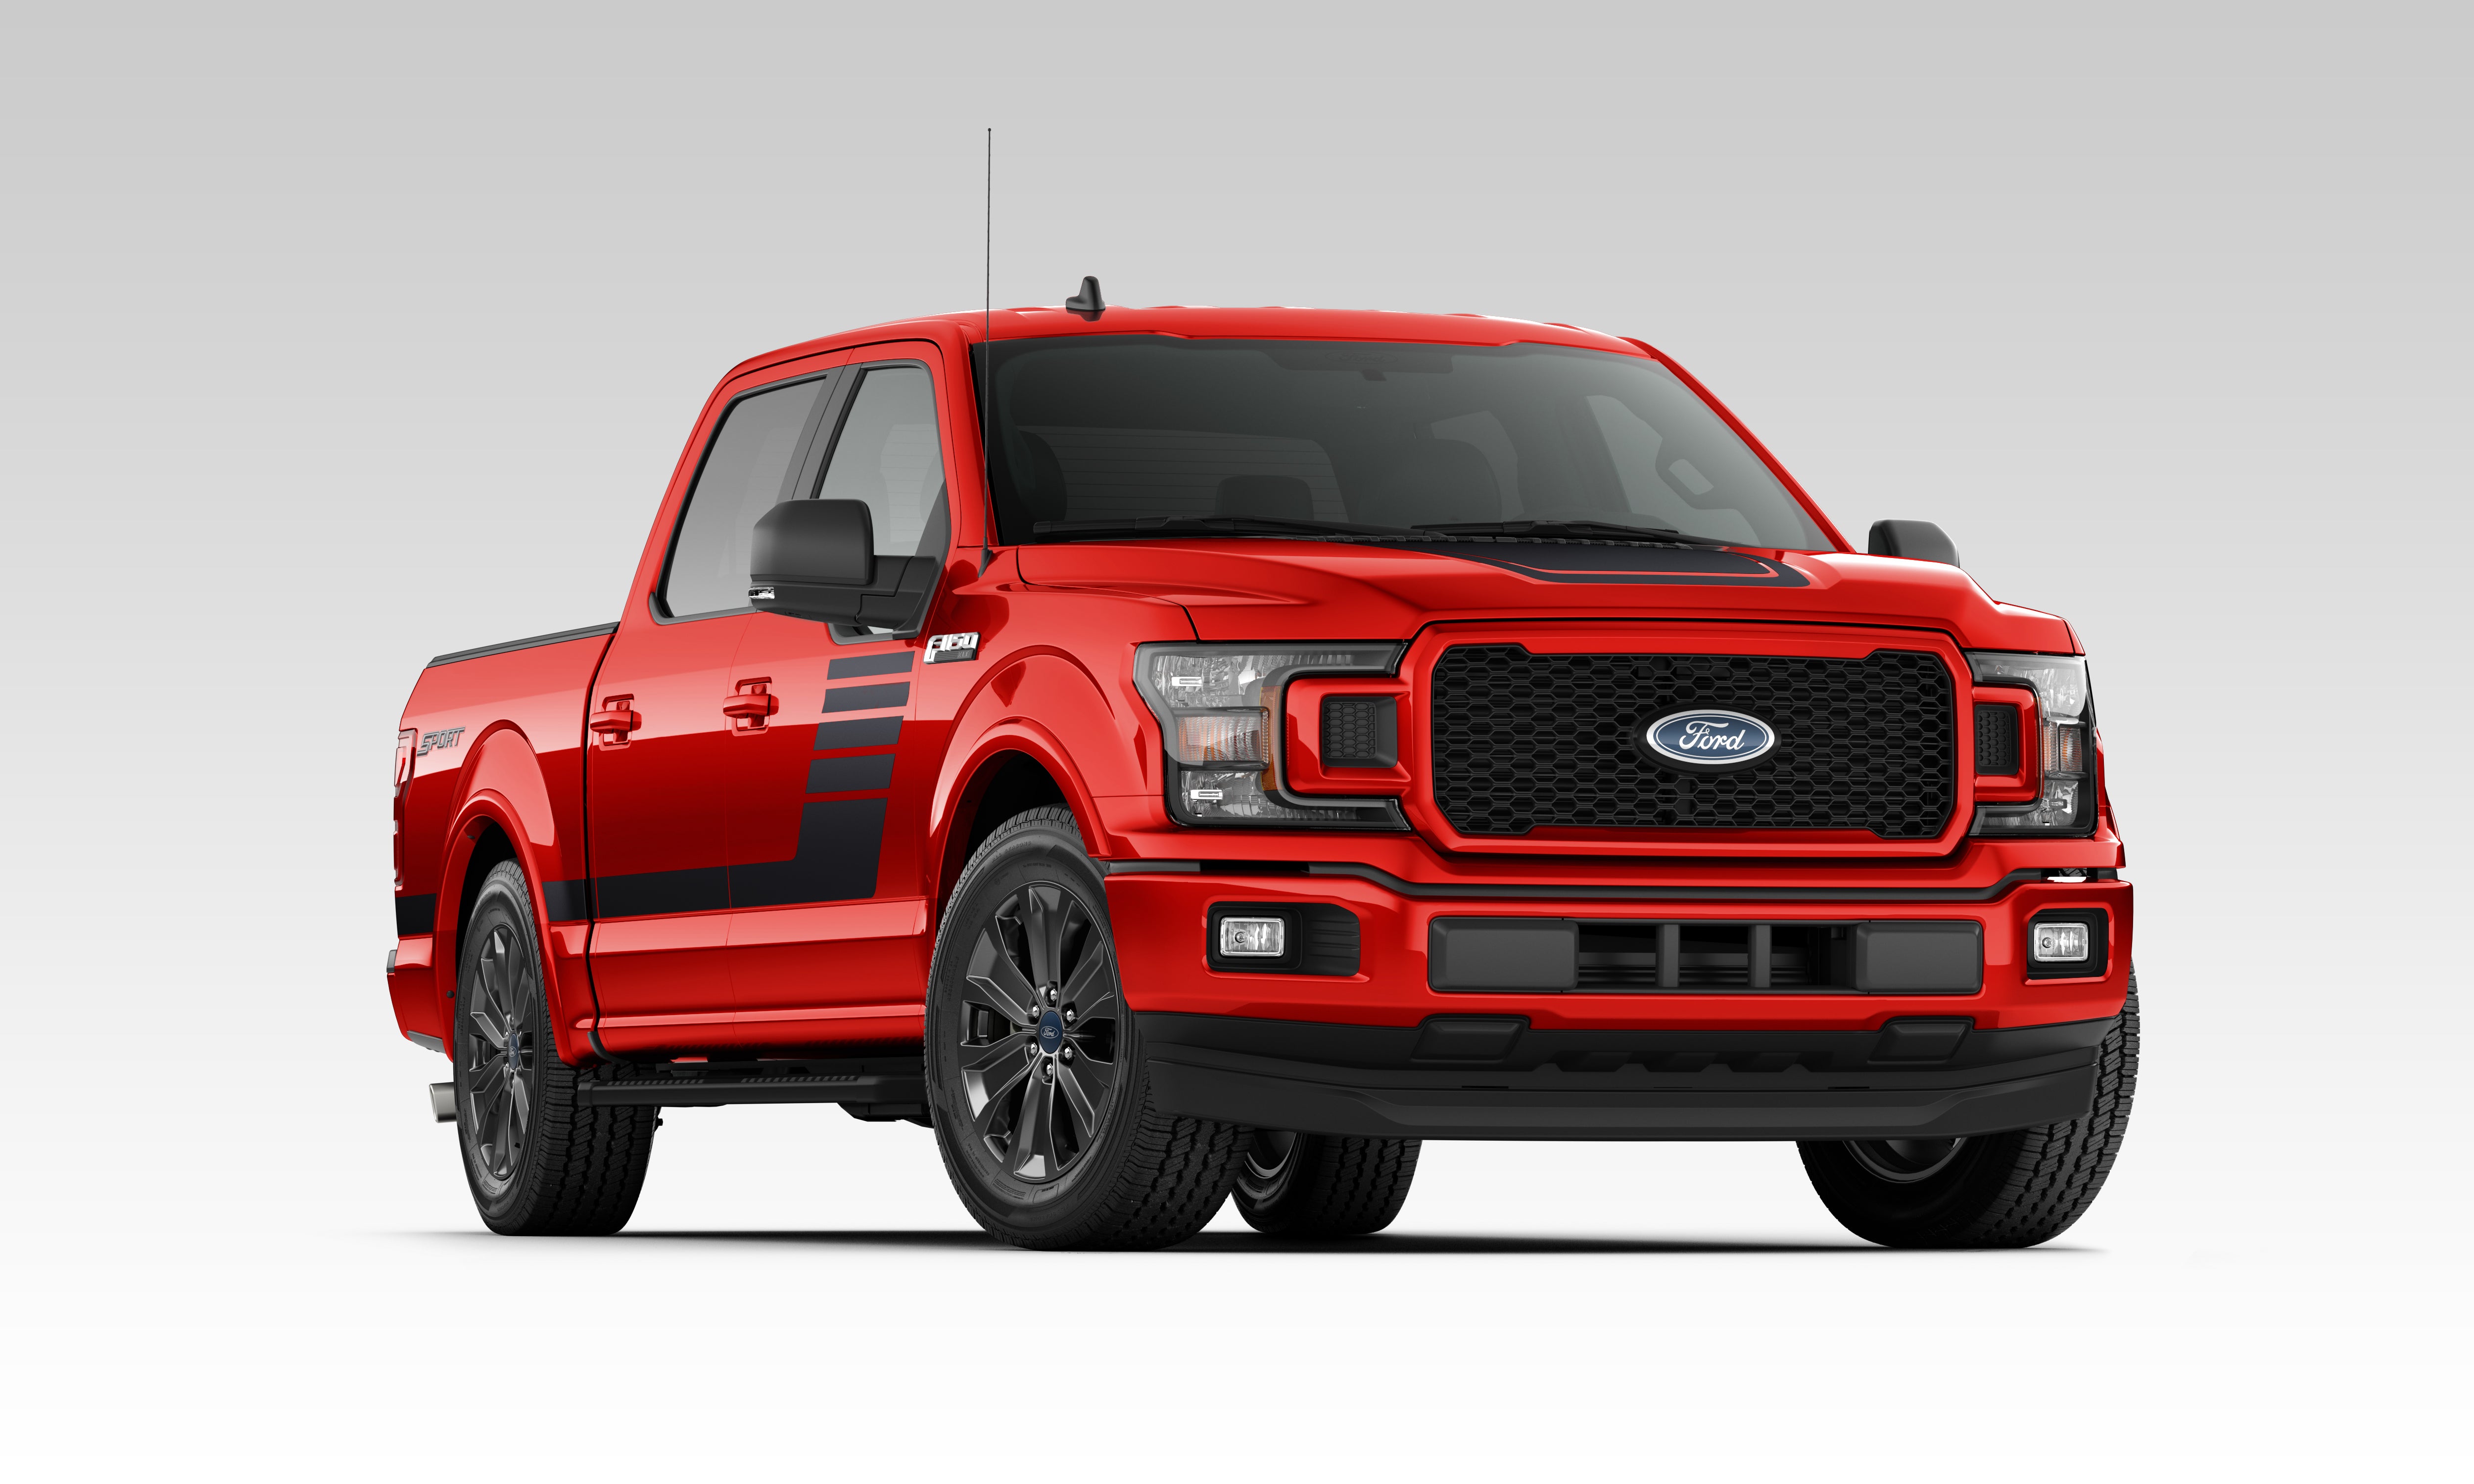 2019 Ford F-150 Research and Overview